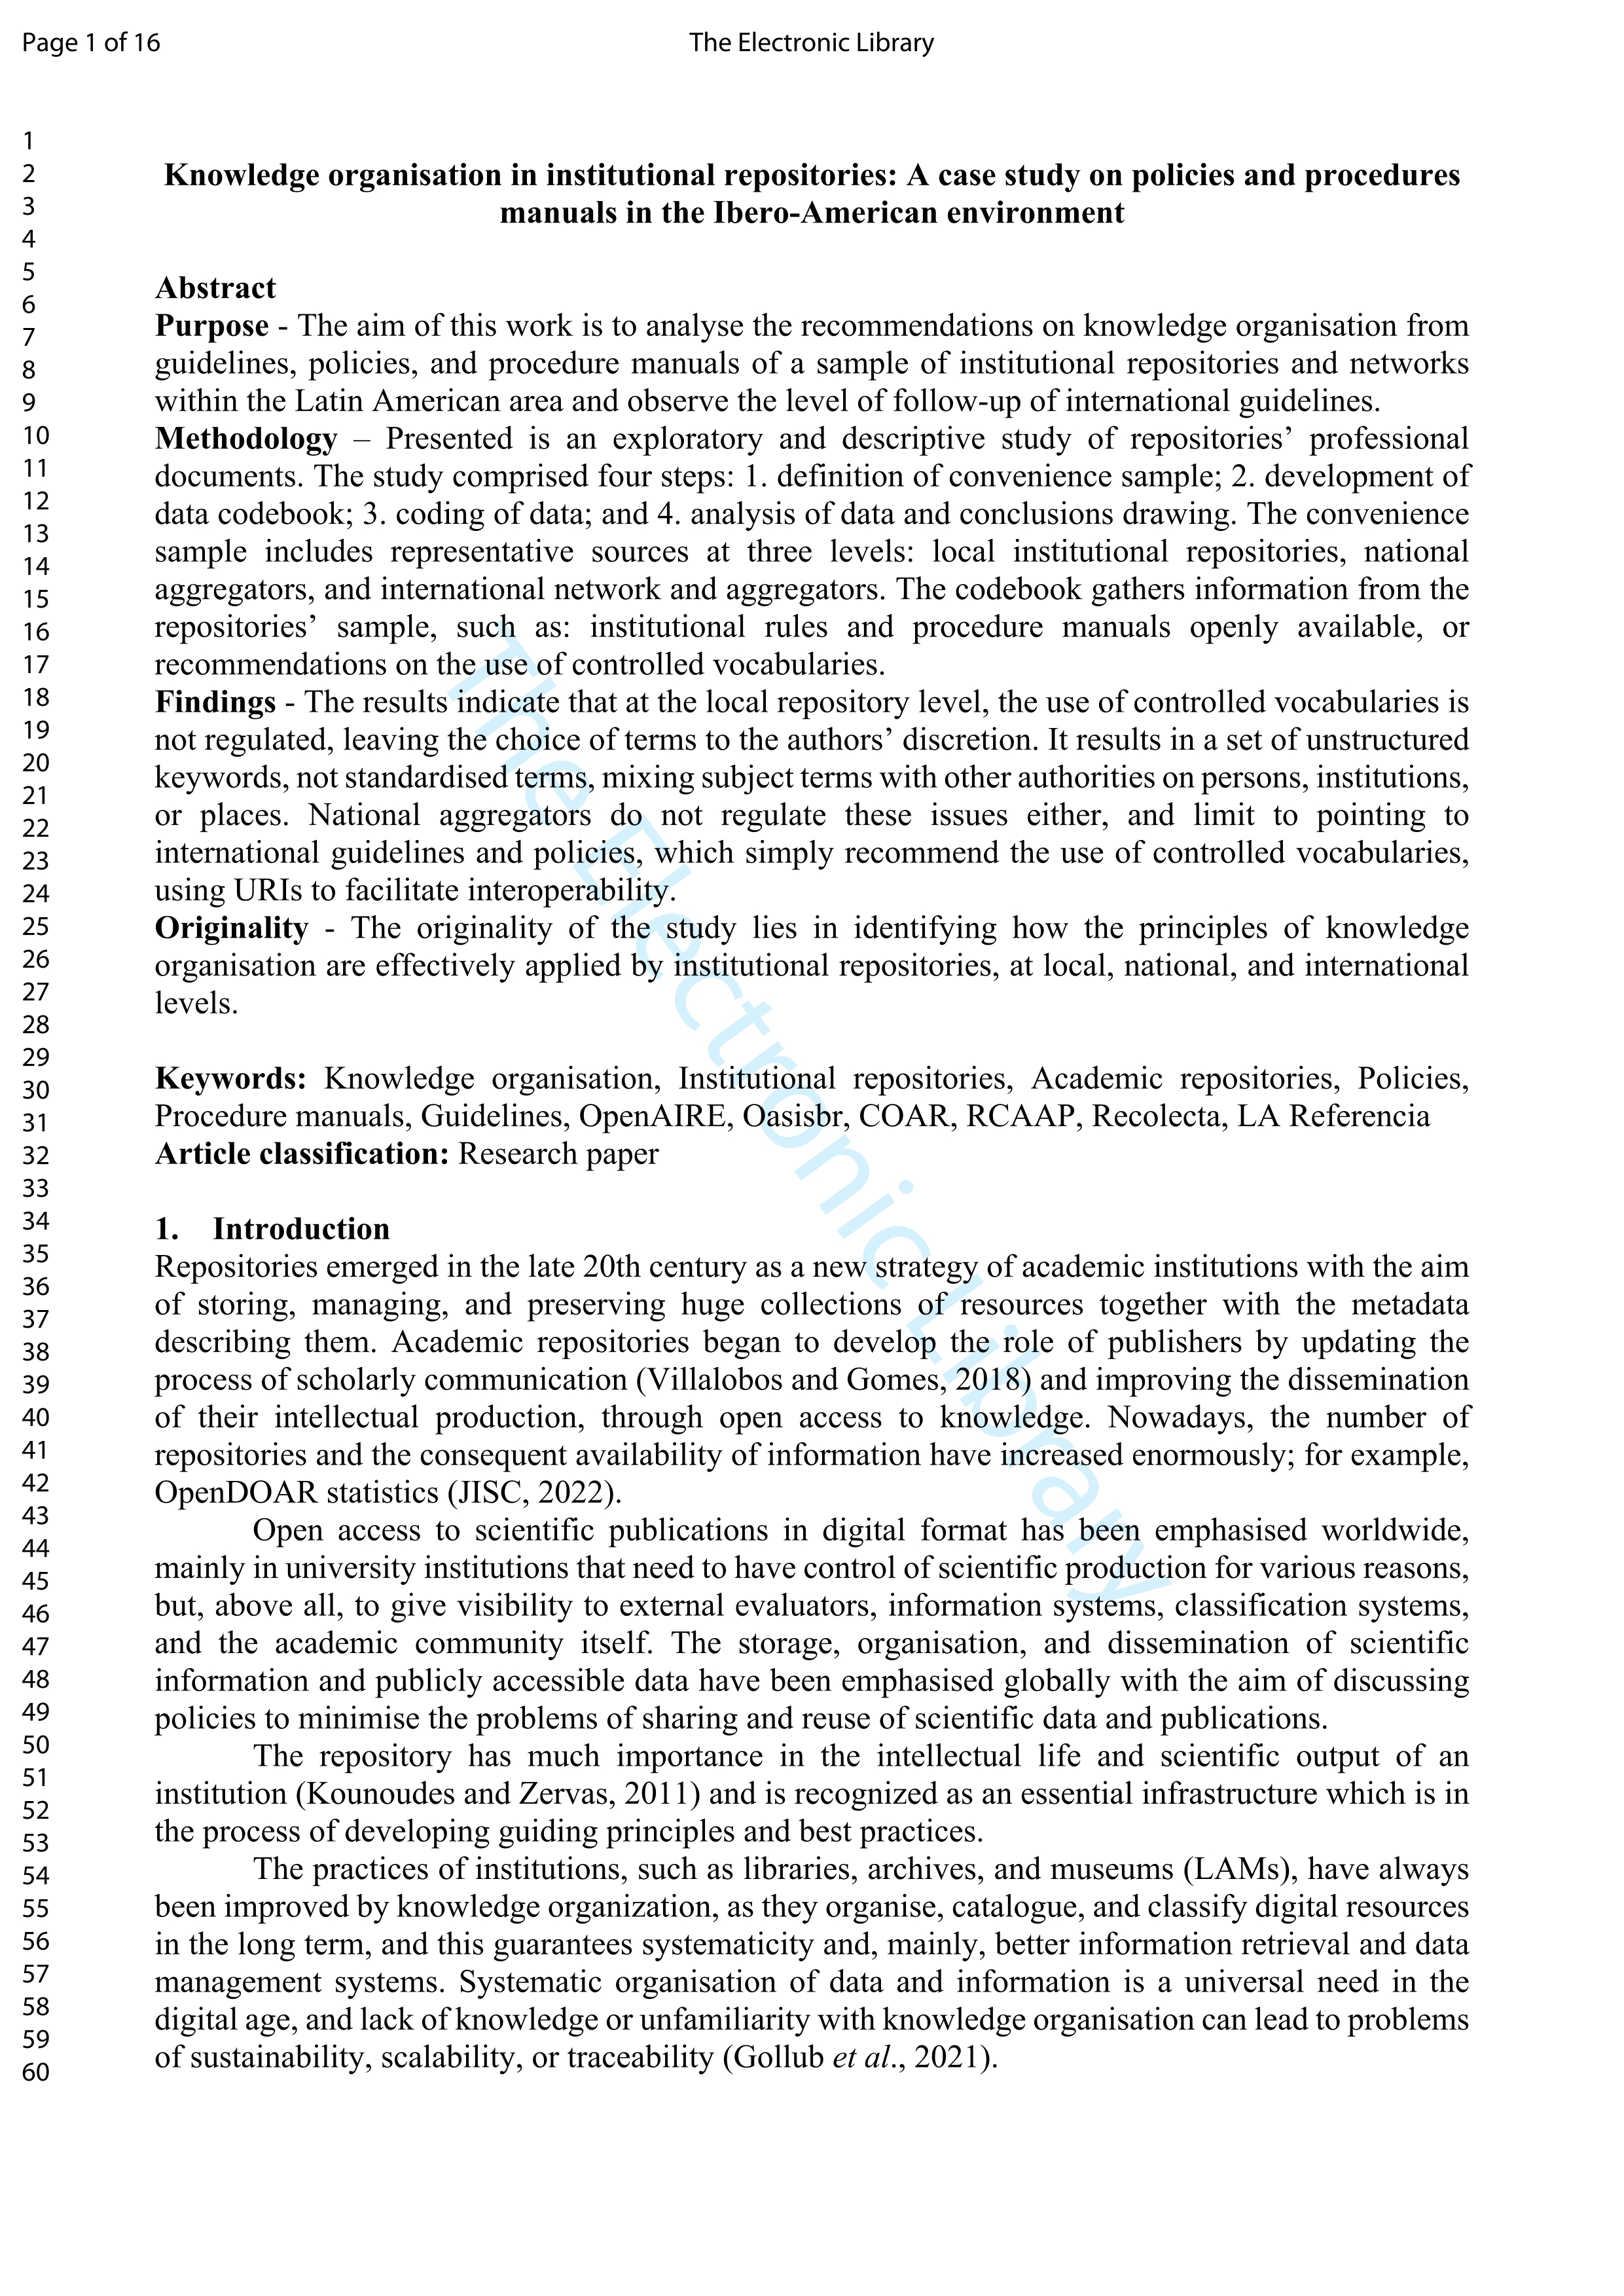 Knowledge organisation in institutional repositories: a case study on policies and procedures manuals in the Ibero-American environment